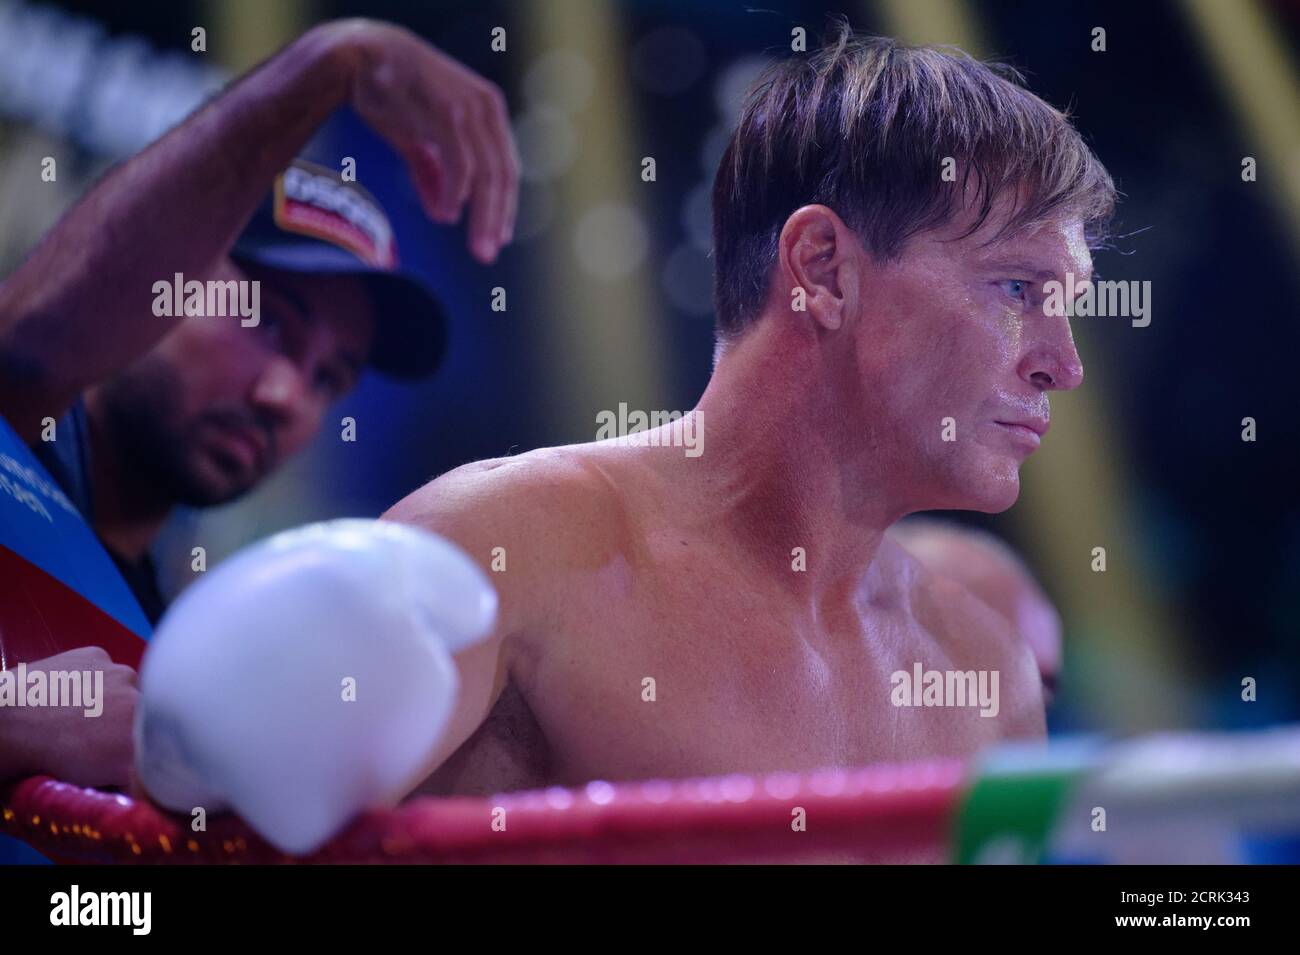 Cologne, Germany. 18th Sep, 2020. Reality star Stephan Jerkel is in the  boxing ring at the TV show "Das große Sat.1 Promiboxen". Credit: Henning  Kaiser/dpa/Alamy Live News Stock Photo - Alamy